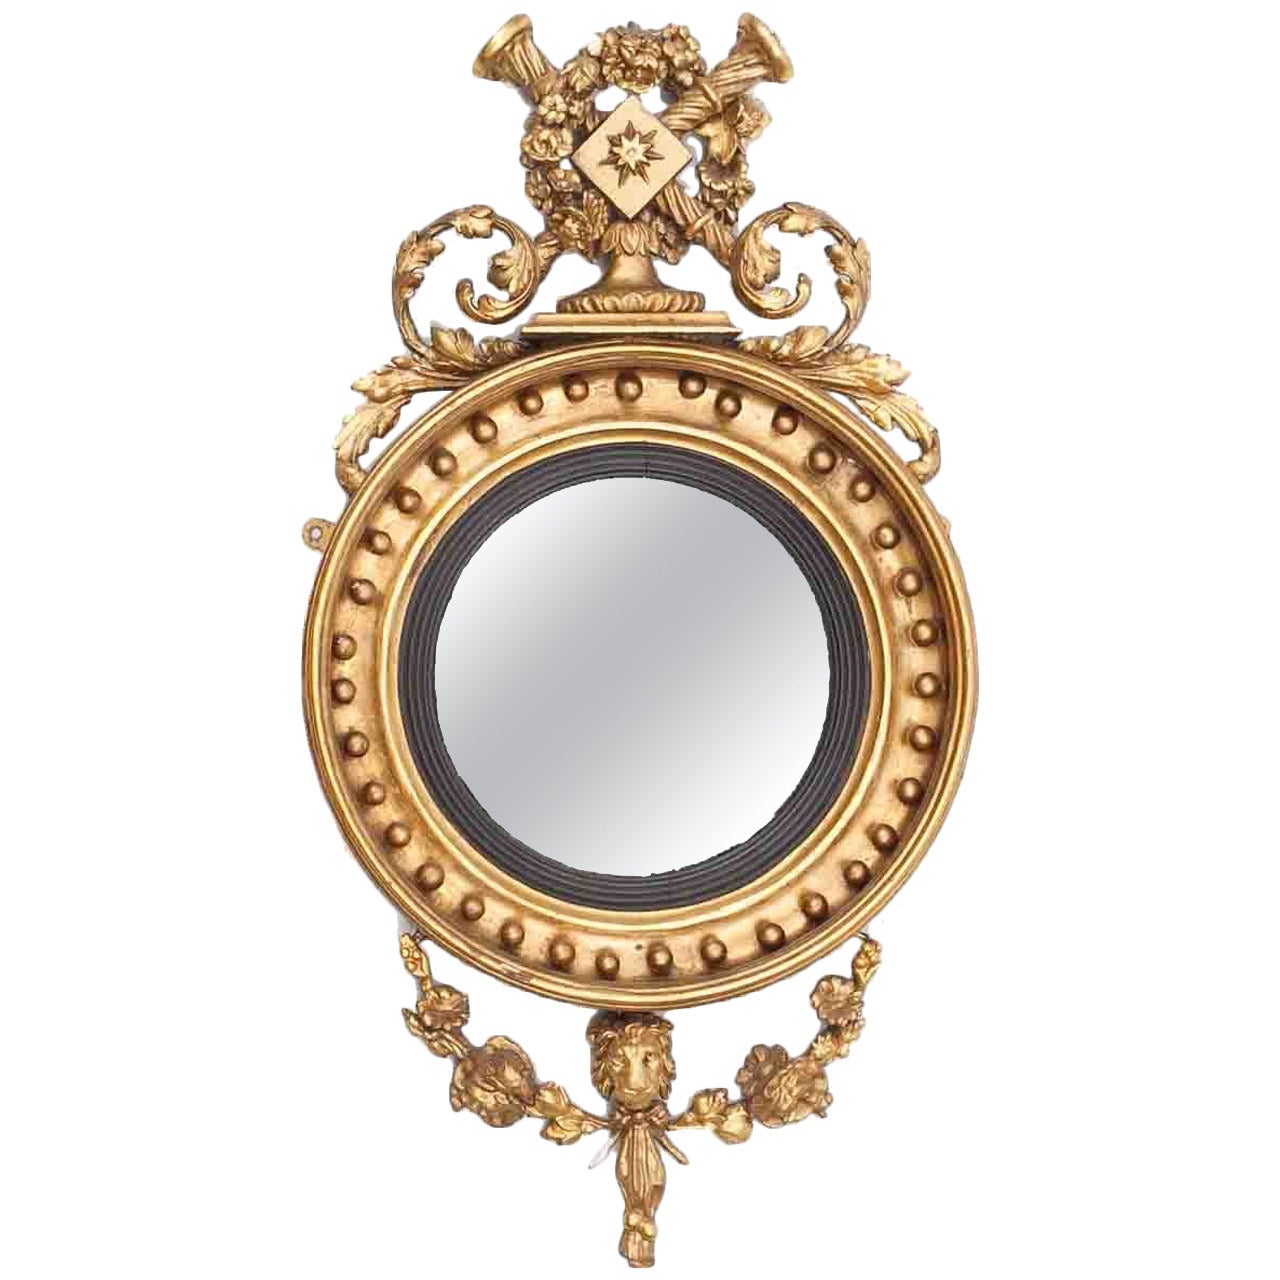 Early 19th Century Regency Giltwood Convex Mirror For Sale